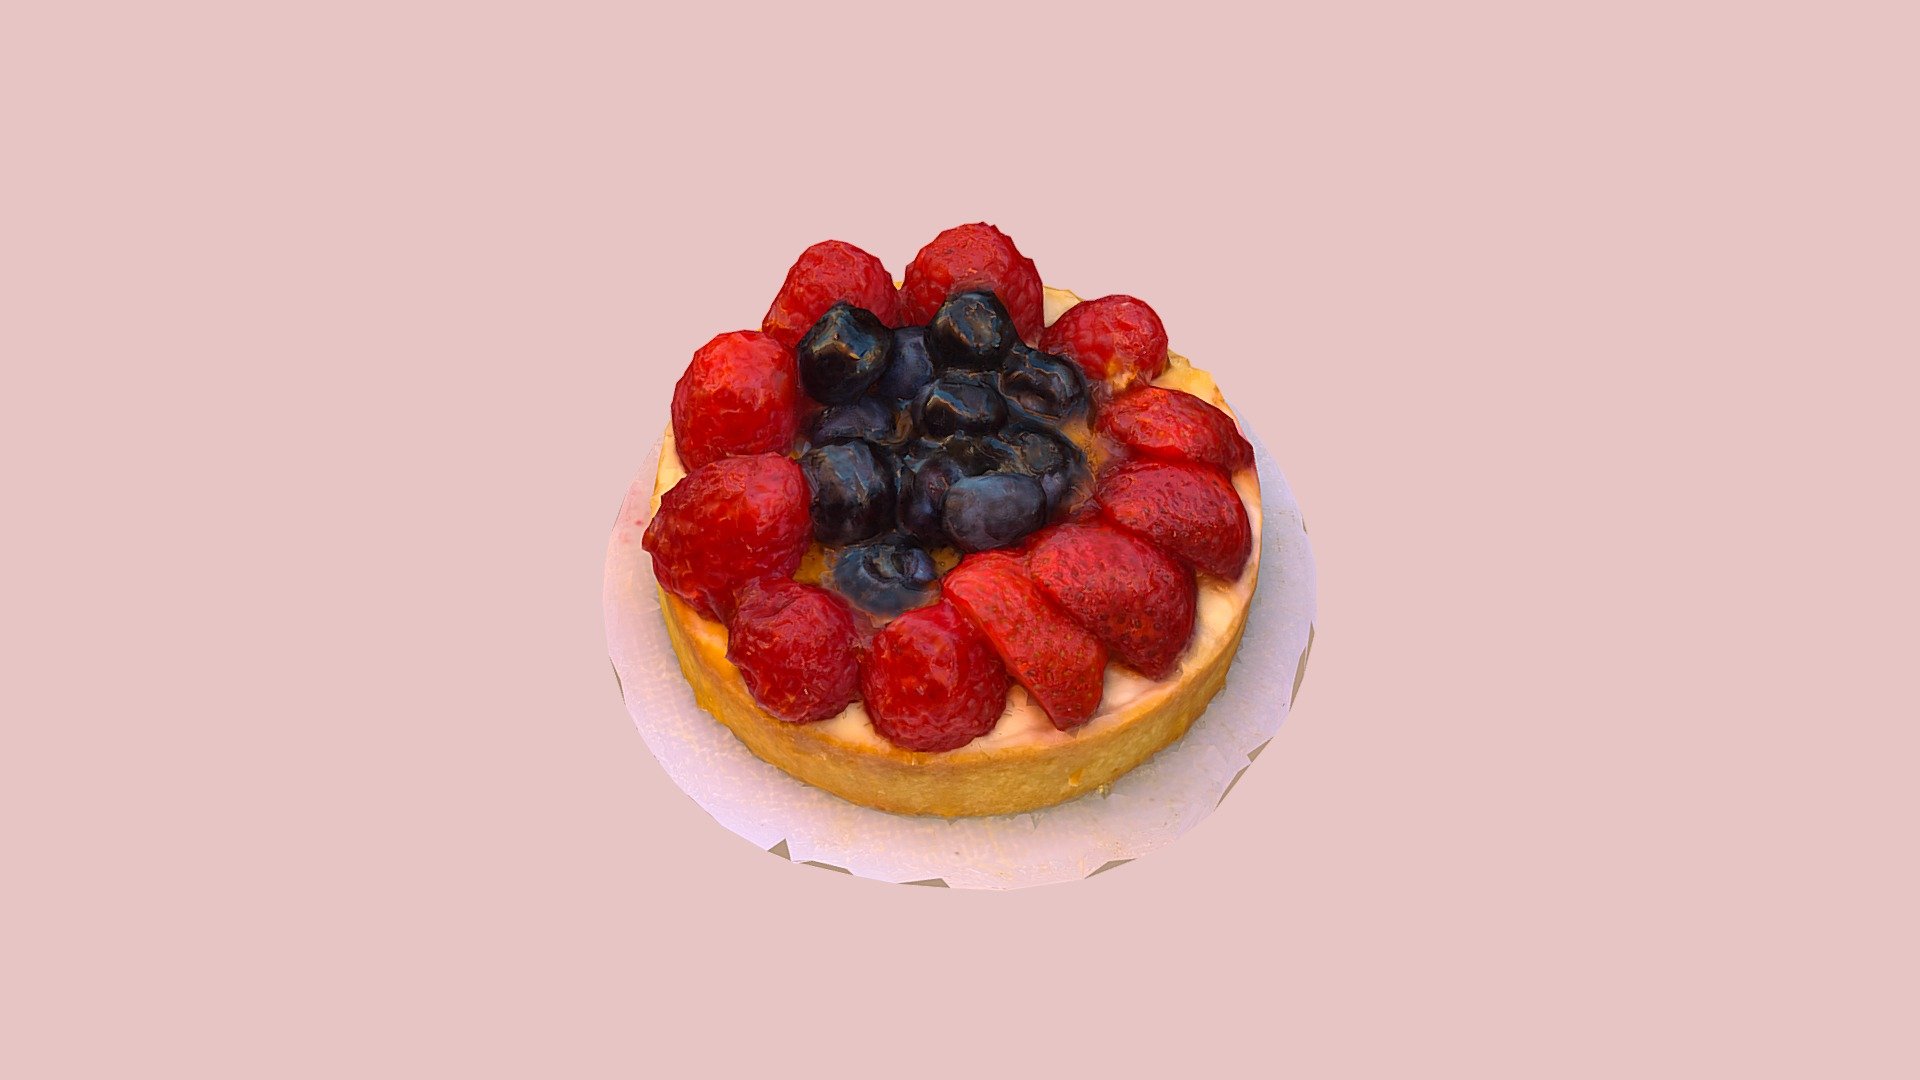 The wonderful strawberry tart my friend and roommate Sandra offered us!
I scanned it by a sunny afternoon on this terrasse ;)

From 66 pictures shot on iPhone 6, processed with Photoscan.

————————————————————————————————————————————————————————————— 

DOWNLOAD — Also available for dowload: sketchfab.com/louis/store

Want to learn more about the technical details of this model? Use Sketchfab's model inspector. Protip, just press &ldquo;I